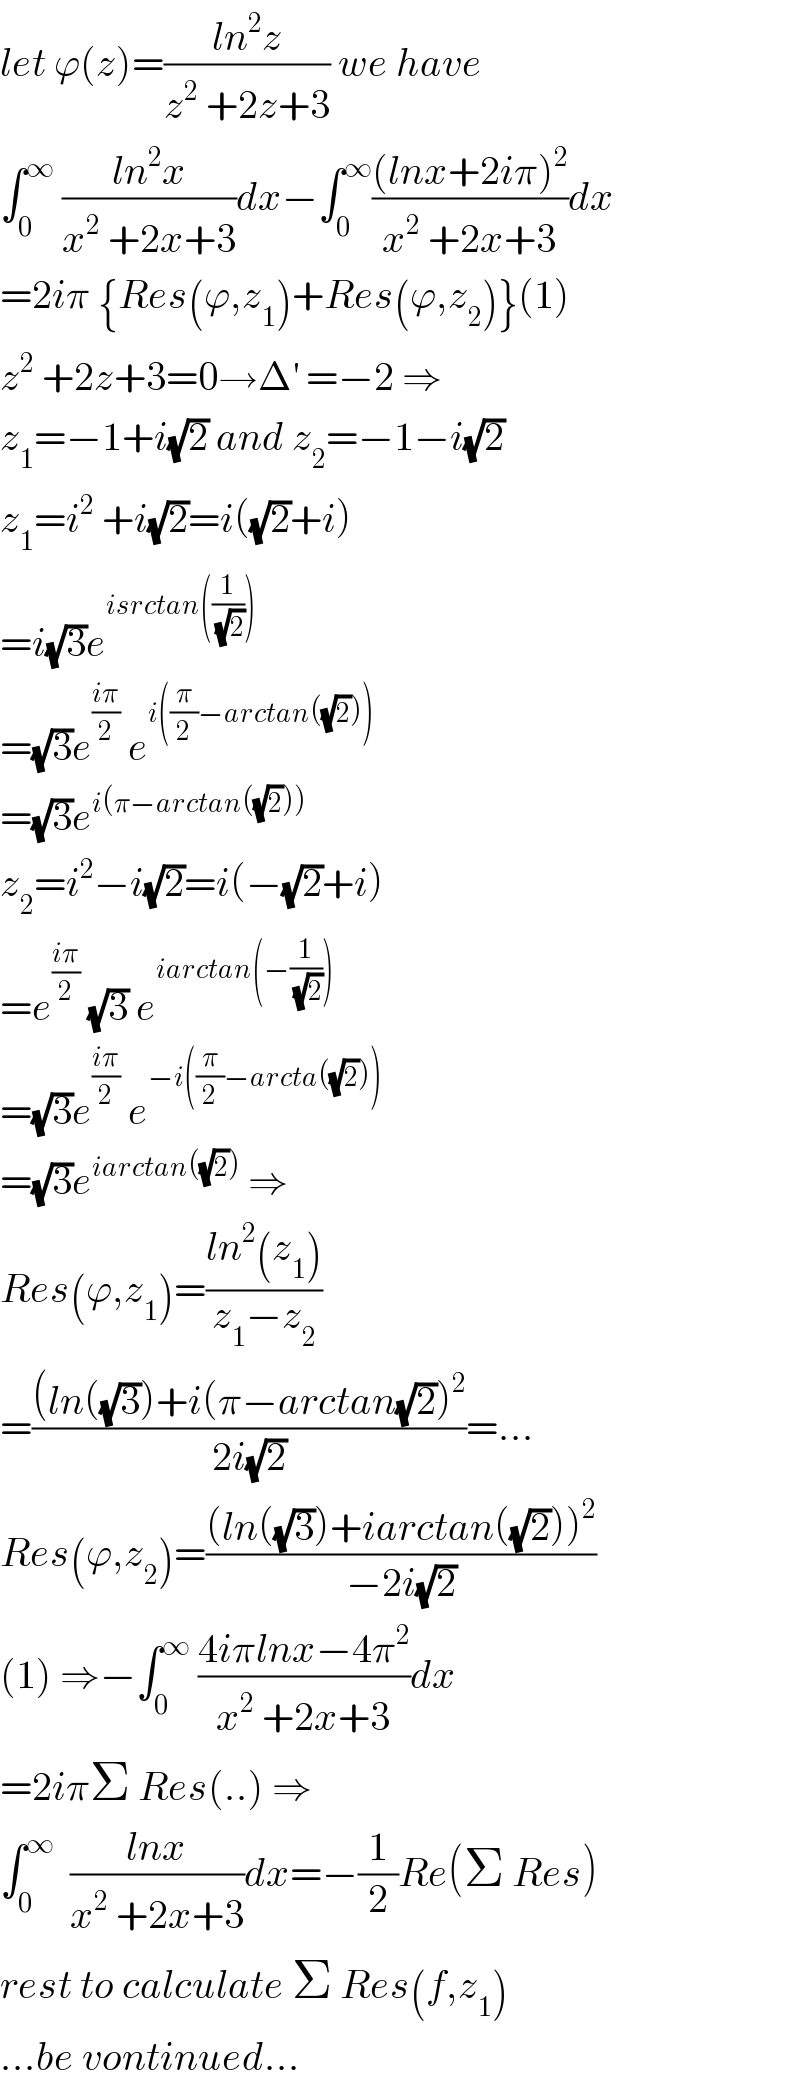 let ϕ(z)=((ln^2 z)/(z^2  +2z+3)) we have  ∫_0 ^∞  ((ln^2 x)/(x^2  +2x+3))dx−∫_0 ^∞ (((lnx+2iπ)^2 )/(x^2  +2x+3))dx   =2iπ {Res(ϕ,z_1 )+Res(ϕ,z_2 )}(1)  z^2  +2z+3=0→Δ^′  =−2 ⇒  z_1 =−1+i(√2) and z_2 =−1−i(√2)  z_1 =i^2  +i(√2)=i((√2)+i)  =i(√3)e^(isrctan((1/( (√2)))))   =(√3)e^((iπ)/2)  e^(i((π/2)−arctan((√2))))   =(√3)e^(i(π−arctan((√2))))   z_2 =i^2 −i(√2)=i(−(√2)+i)  =e^((iπ)/2)  (√3) e^(iarctan(−(1/( (√2)))))   =(√3)e^((iπ)/2)  e^(−i((π/2)−arcta((√2))))   =(√3)e^(iarctan((√2)))  ⇒  Res(ϕ,z_1 )=((ln^2 (z_1 ))/(z_1 −z_2 ))  =(((ln((√3))+i(π−arctan(√2))^2 )/(2i(√2)))=...  Res(ϕ,z_2 )=(((ln((√3))+iarctan((√2)))^2 )/(−2i(√2)))  (1) ⇒−∫_0 ^∞  ((4iπlnx−4π^2 )/(x^2  +2x+3))dx  =2iπΣ Res(..) ⇒  ∫_0 ^∞   ((lnx)/(x^2  +2x+3))dx=−(1/2)Re(Σ Res)  rest to calculate Σ Res(f,z_1 )  ...be vontinued...  